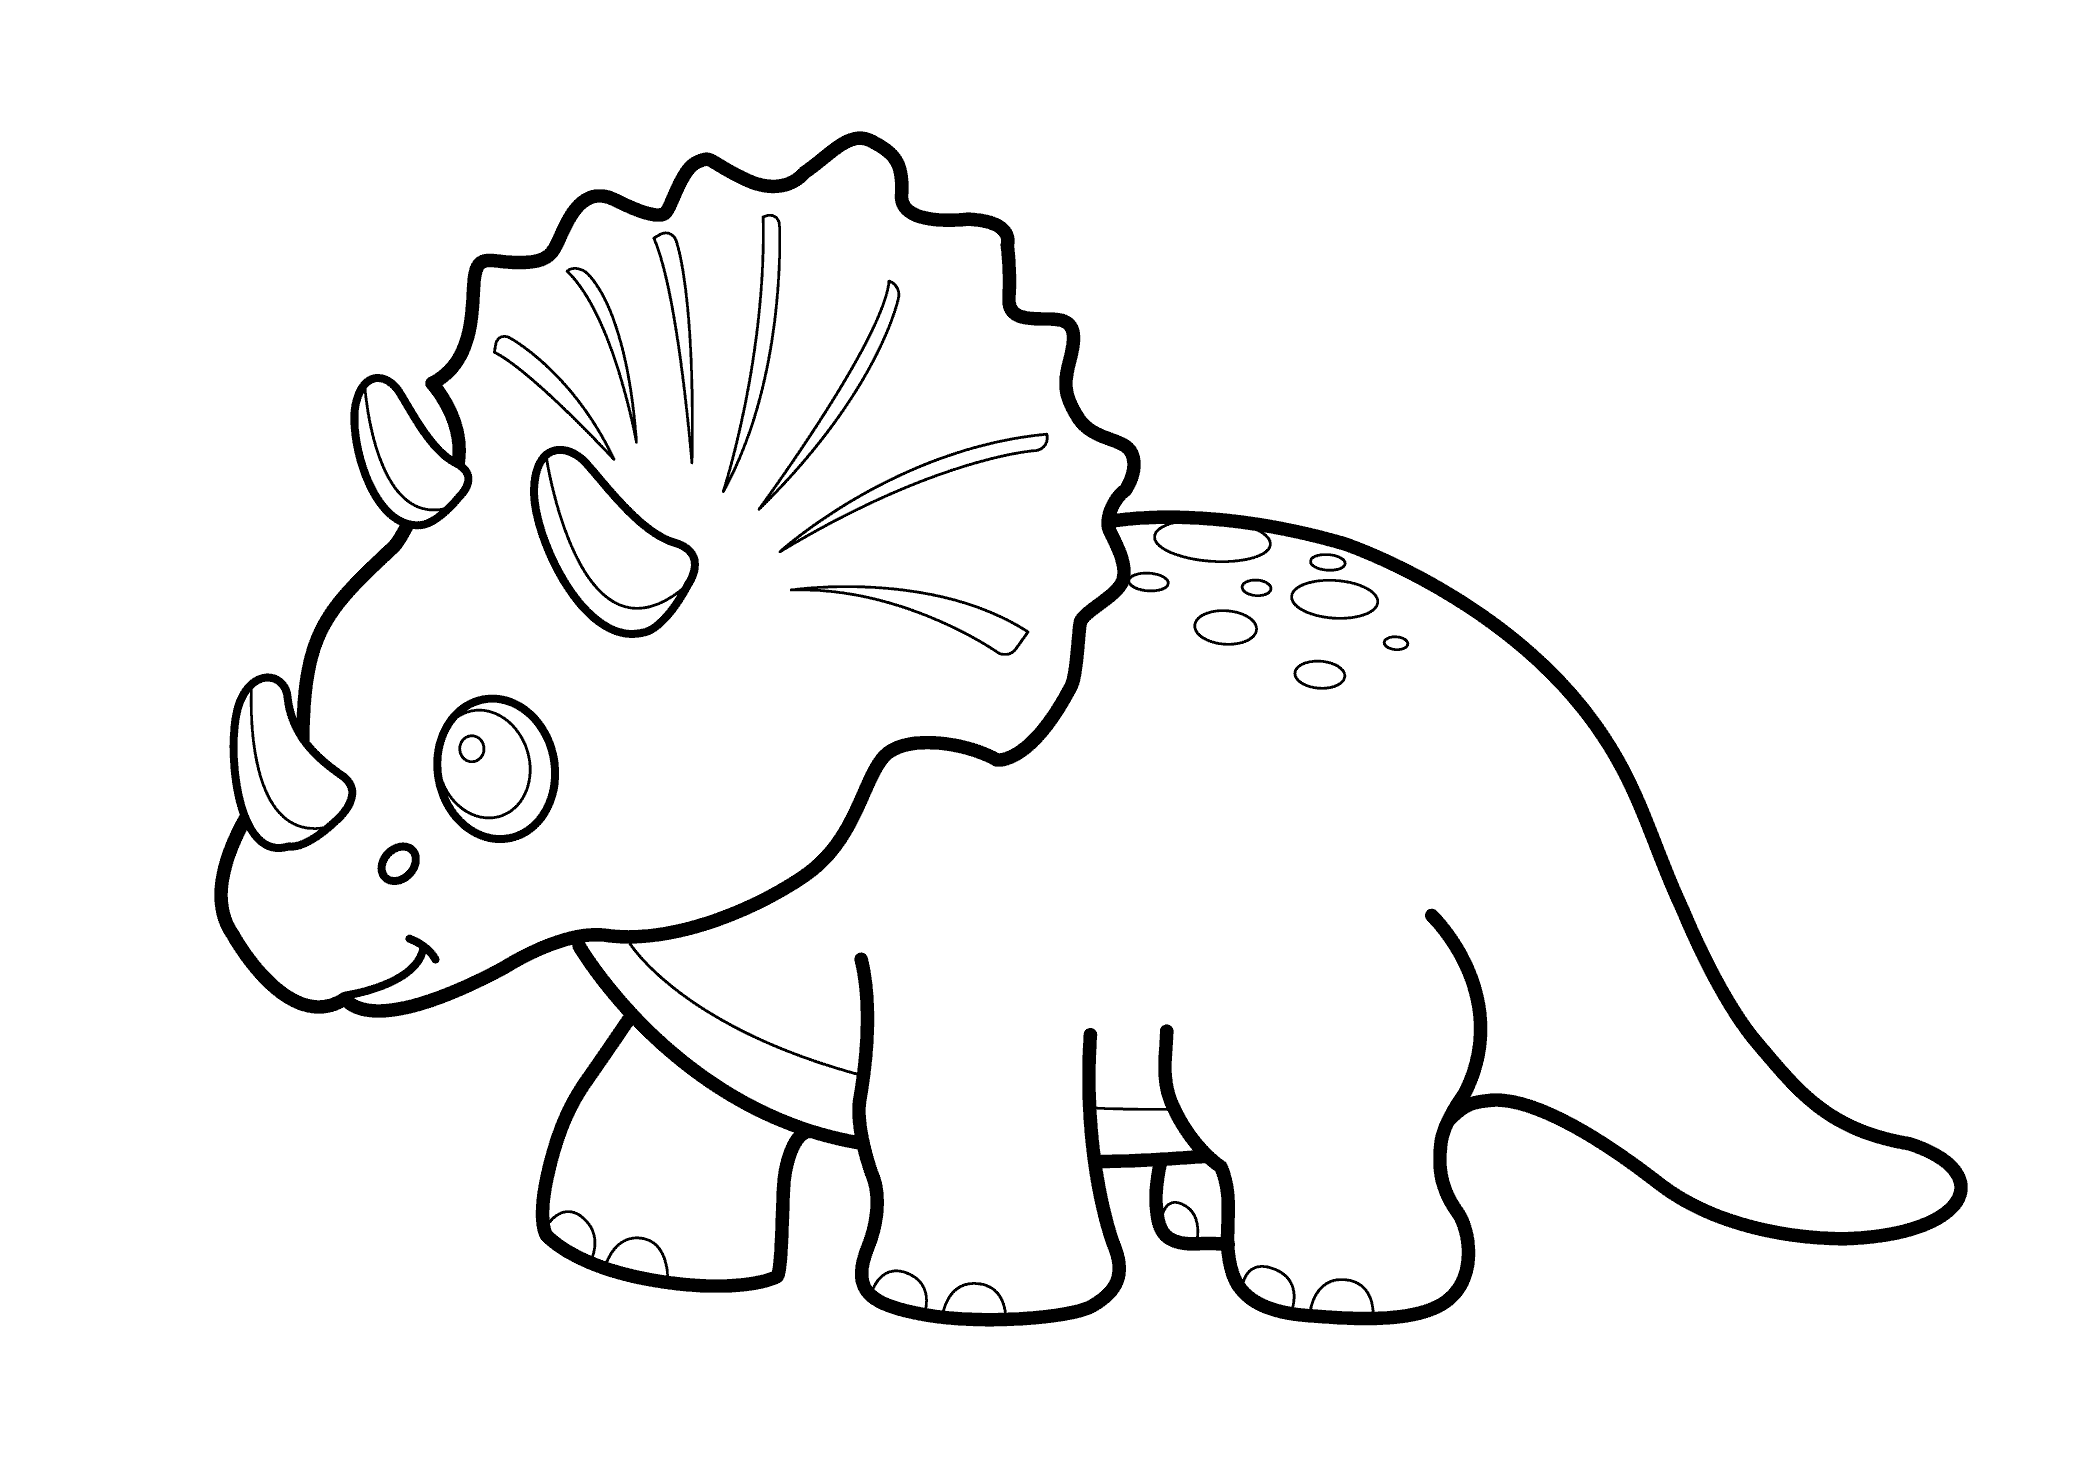 dinosaur coloring pages for toddlers dinosaur coloring pages free printable pictures coloring dinosaur for coloring toddlers pages 